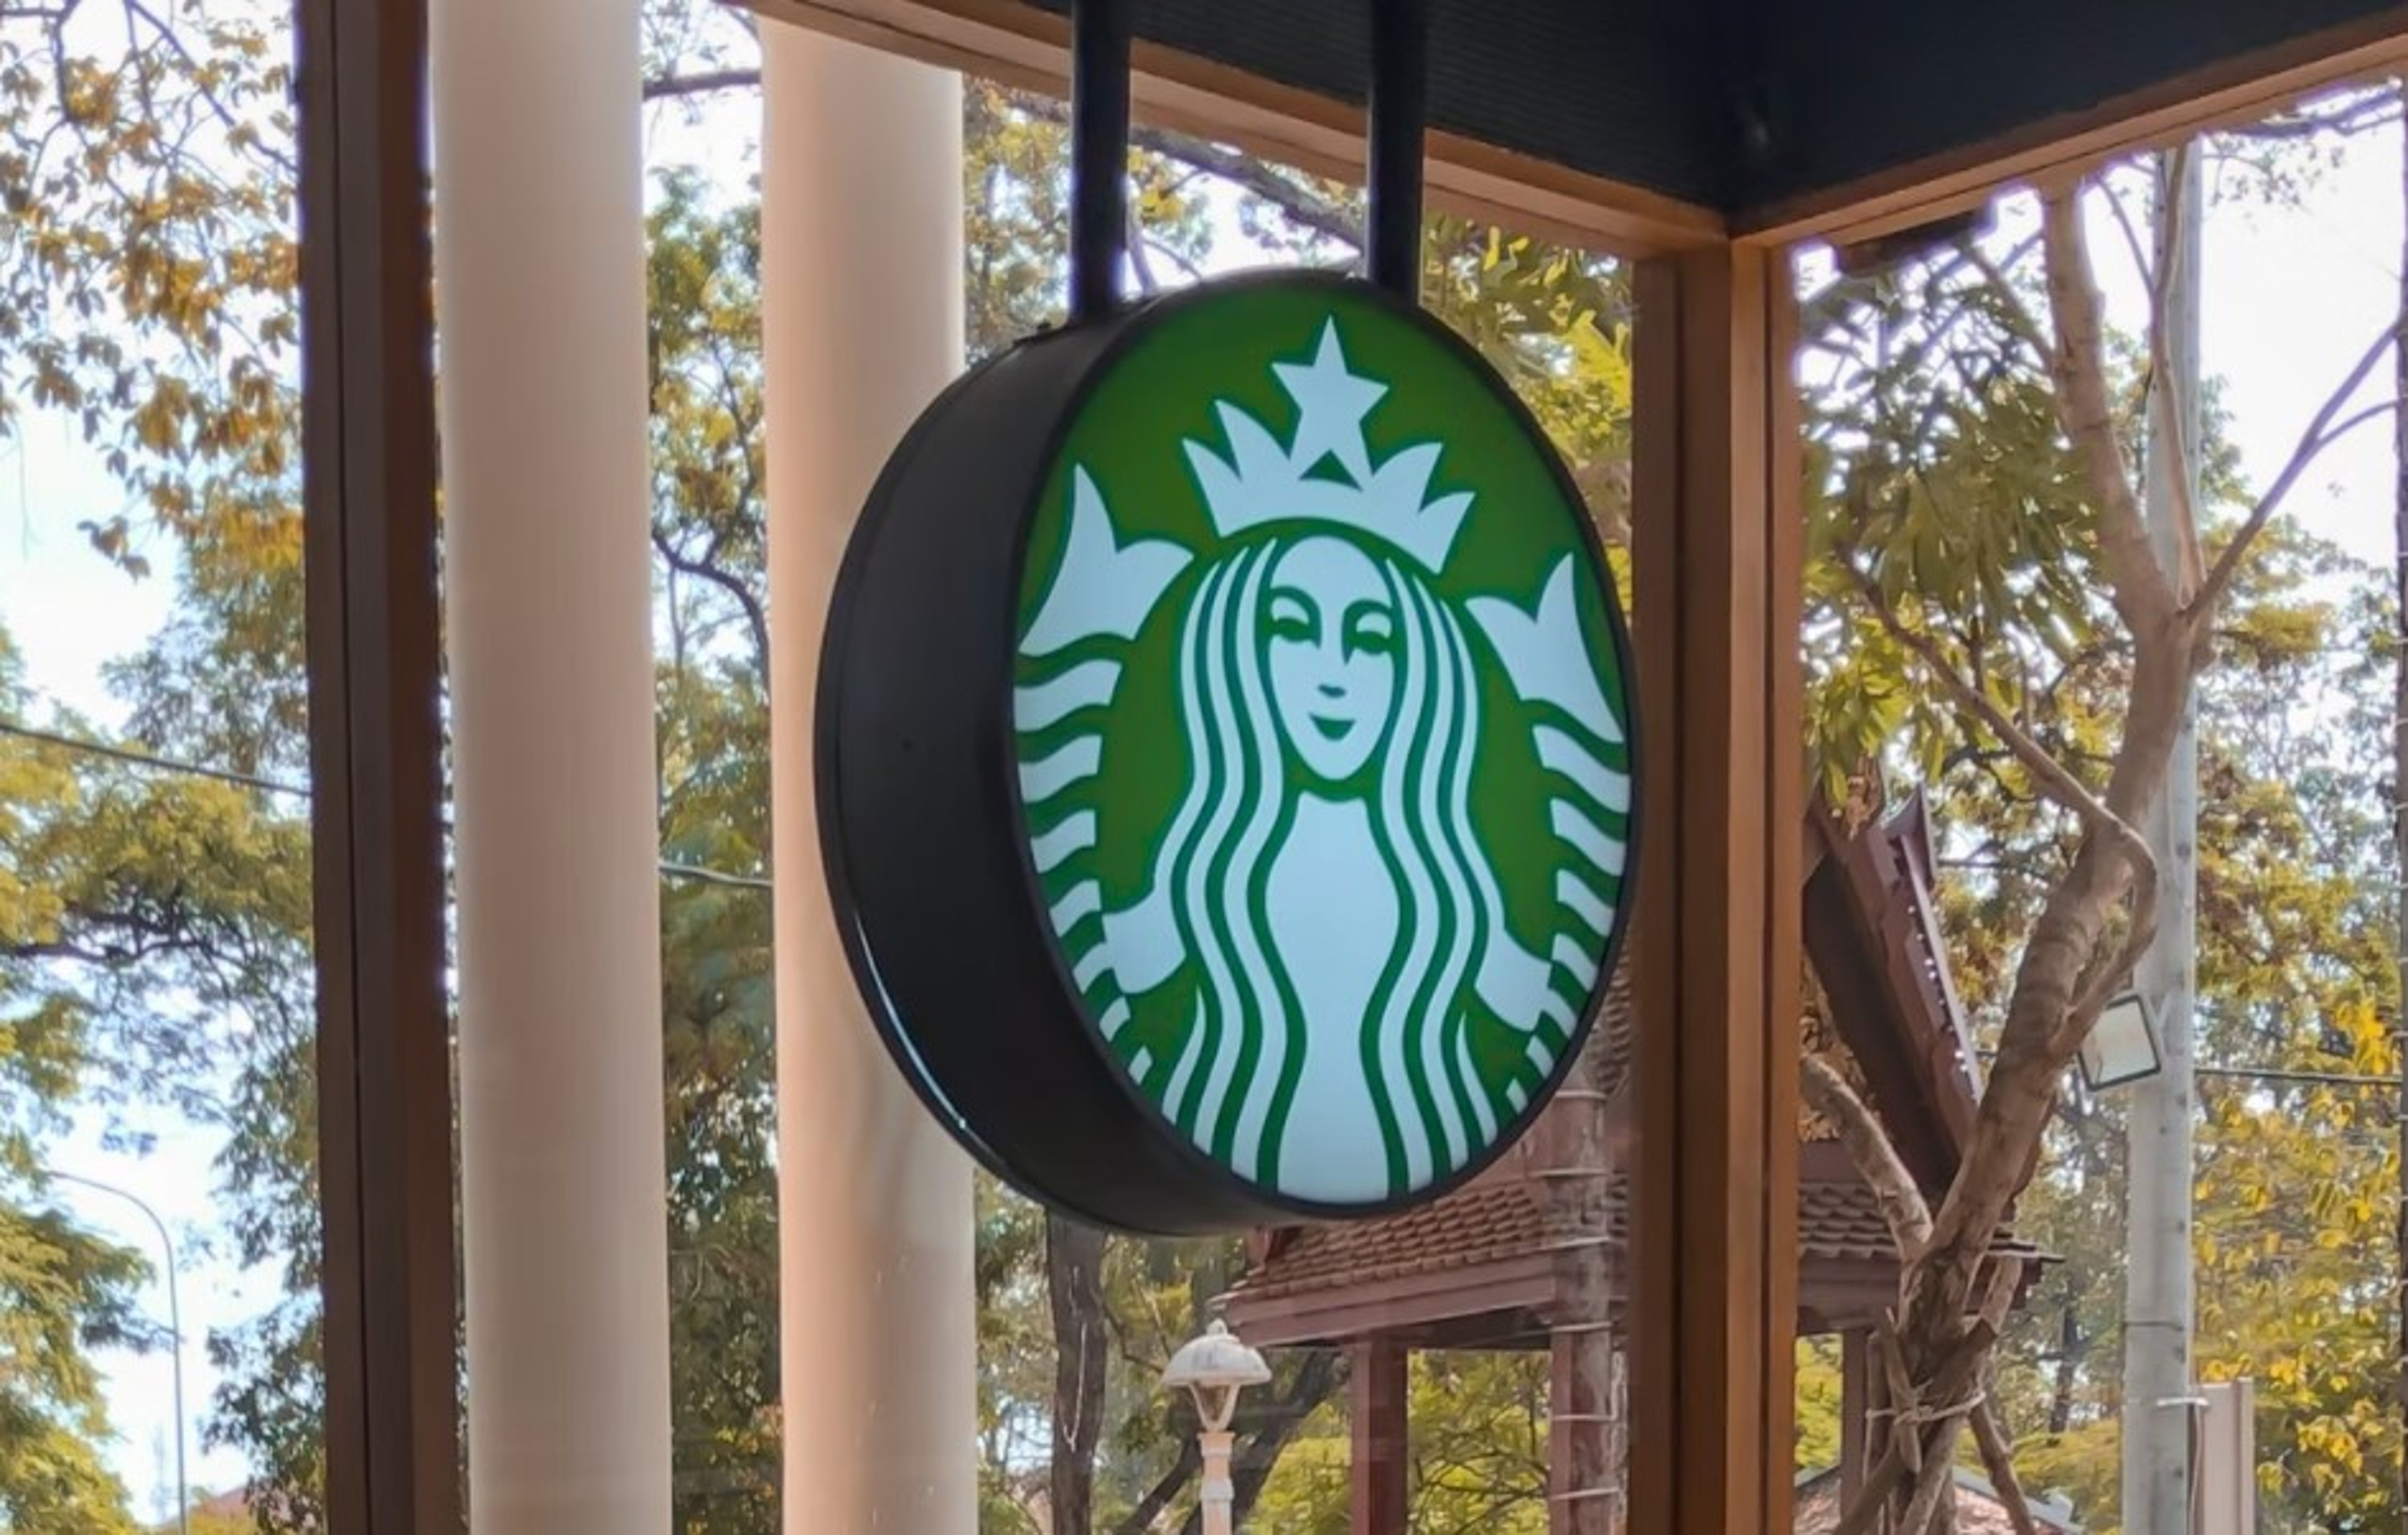 Starbucks Q2 Earnings Highlights: Hits Record Q2 Revenue Despite China COVID-19 Setback, More Stores Openings Planned